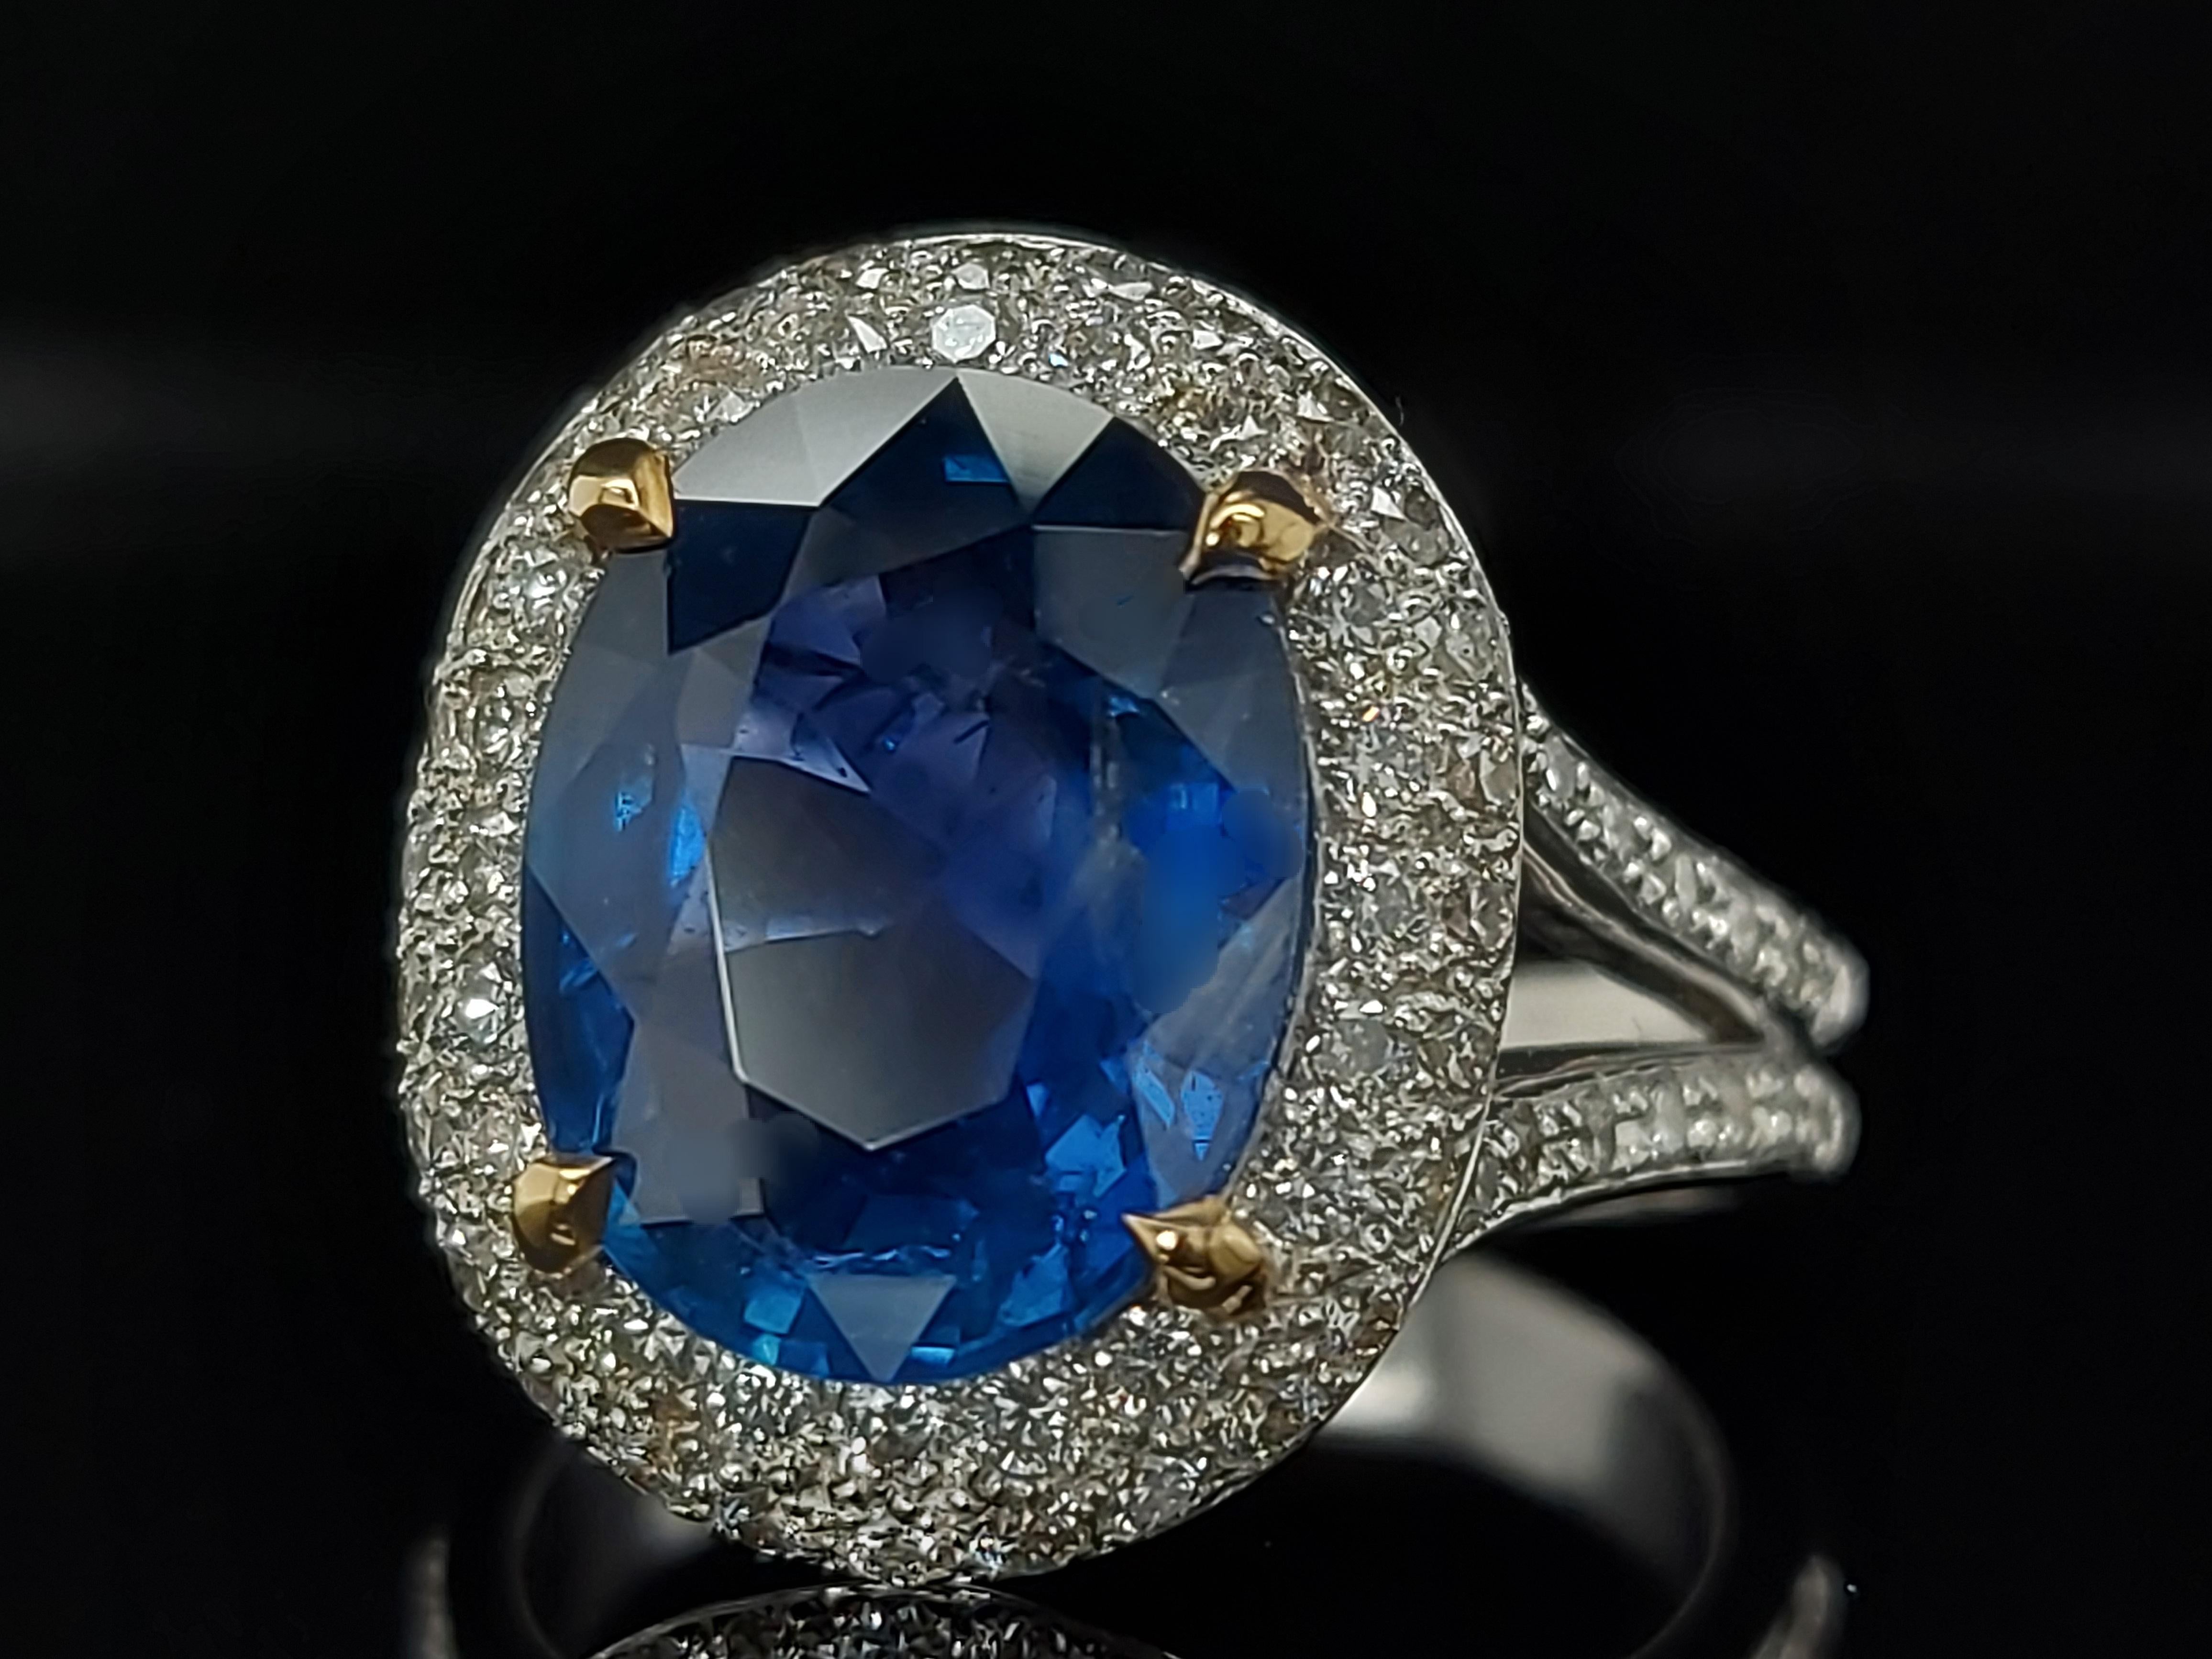 Stunning 18 kt white gold ring with a big striking Burma No heat intense blue sapphire stone surrounded by diamonds.

Sapphire: Burma No Heat sapphire 4.88 Carat.

Diamonds: 76 round cut diamonds, 1,02 ct

Material: 18kt white gold

Total weight: